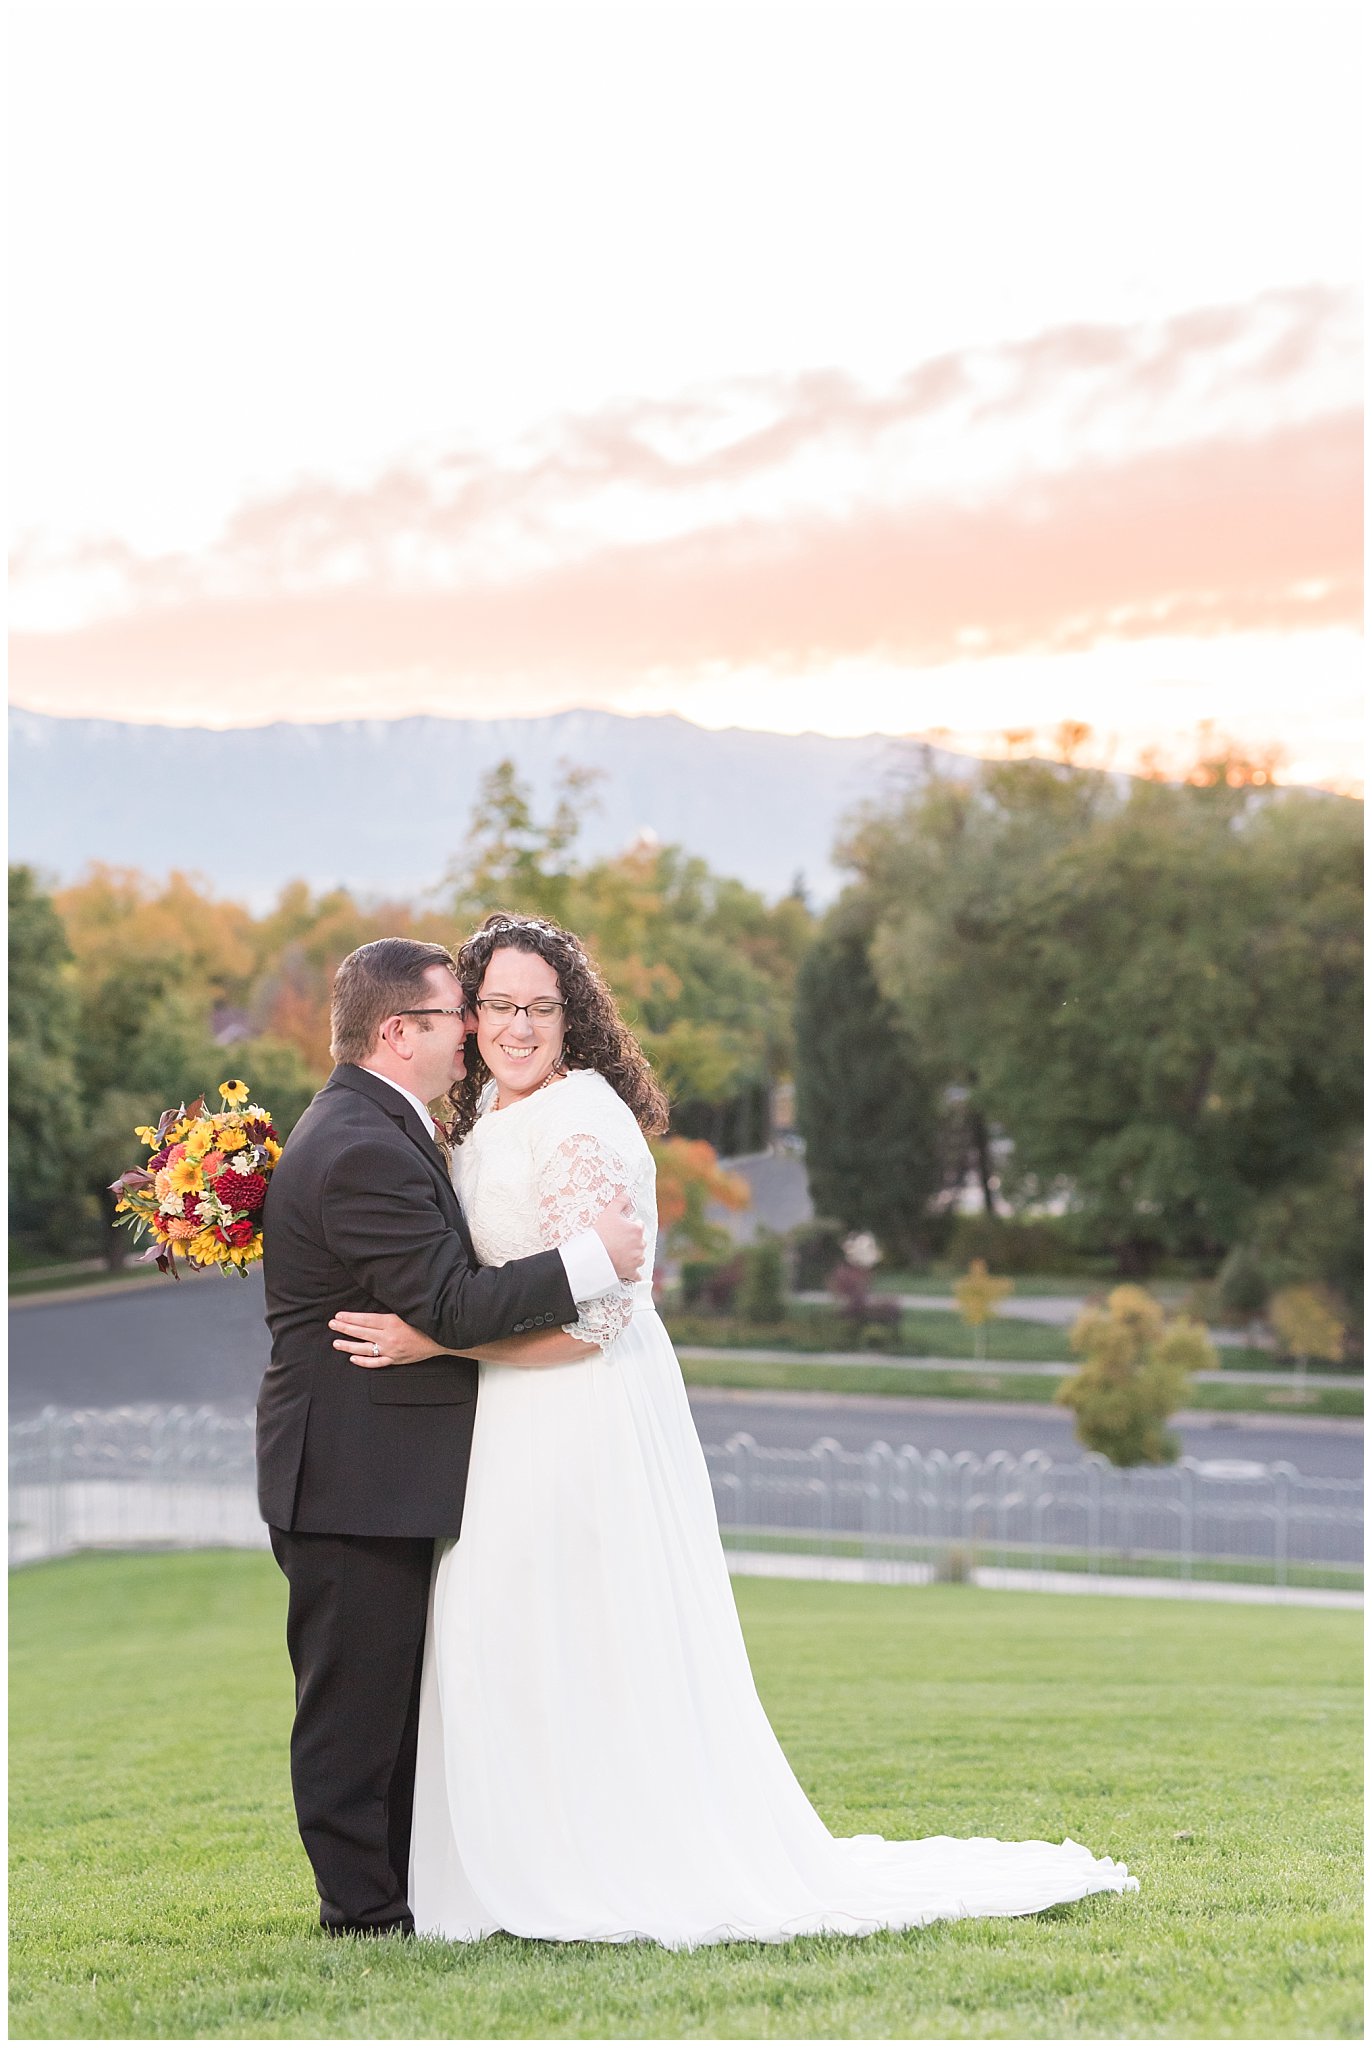 Groom in black suit and gold tie, bride in simple lace sleeve wedding dress with fall bouquet | Logan sunset | Logan Temple Fall Formal Session | Jessie and Dallin Photography